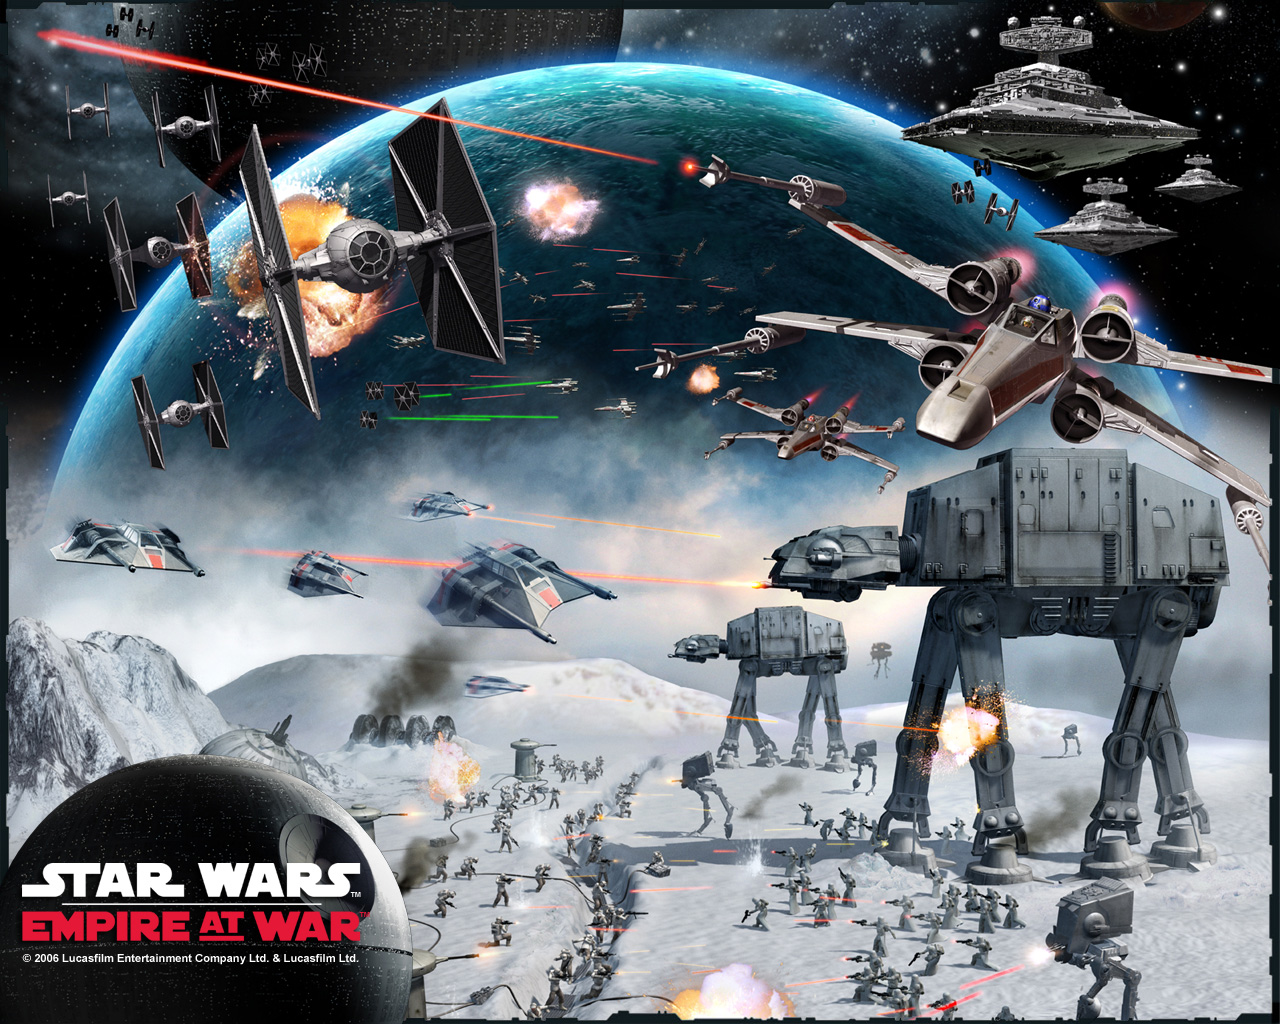 star destroyer, star wars: empire at war, video game, at at walker, star wars, tie fighter, x wing Free Stock Photo